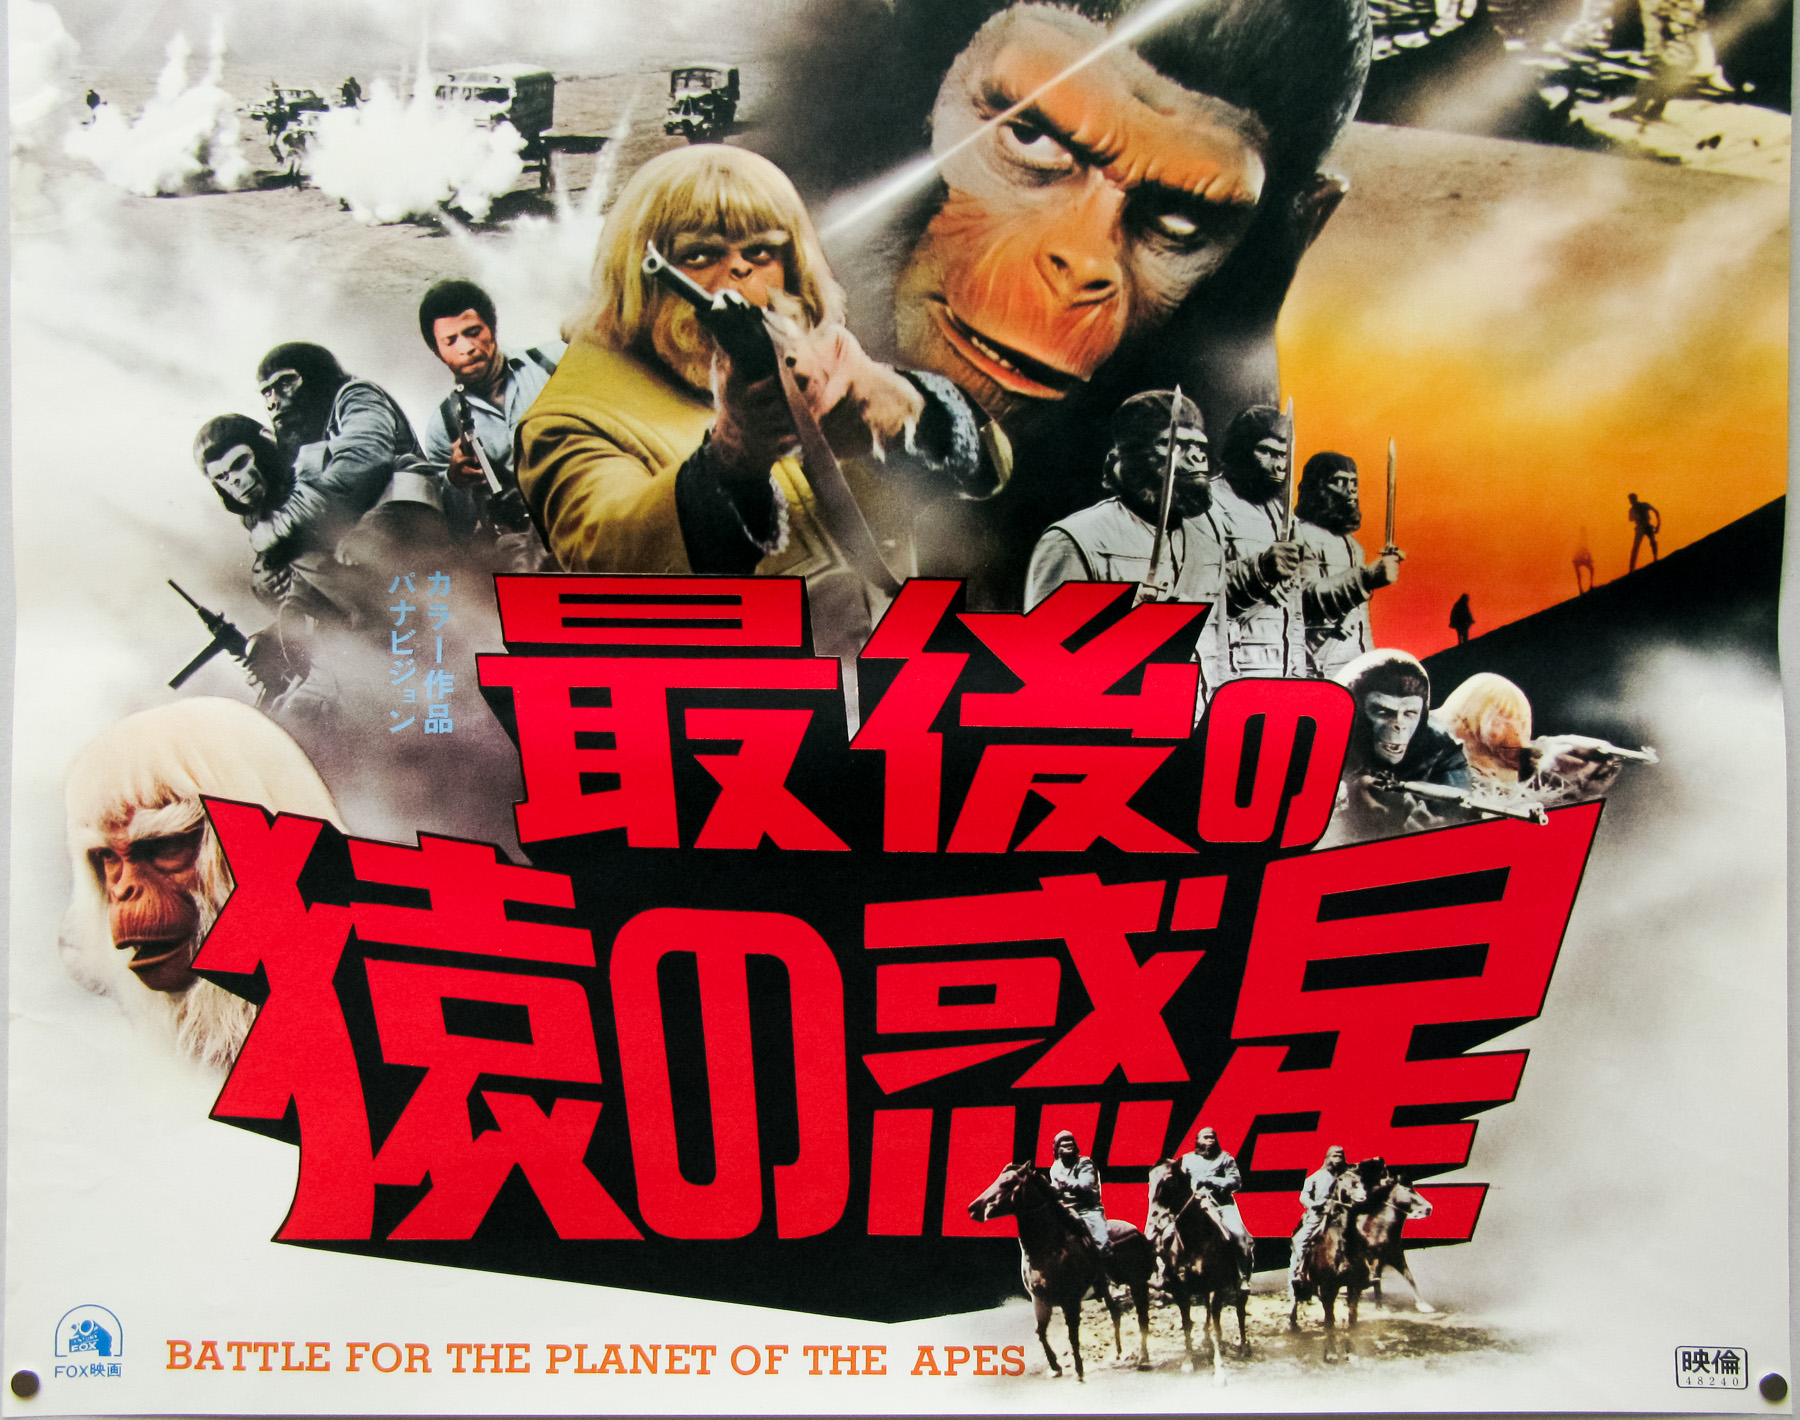 Vintage Japanese Battle For The Planet Of The Apes  Movie Poster A3/A4 Print 